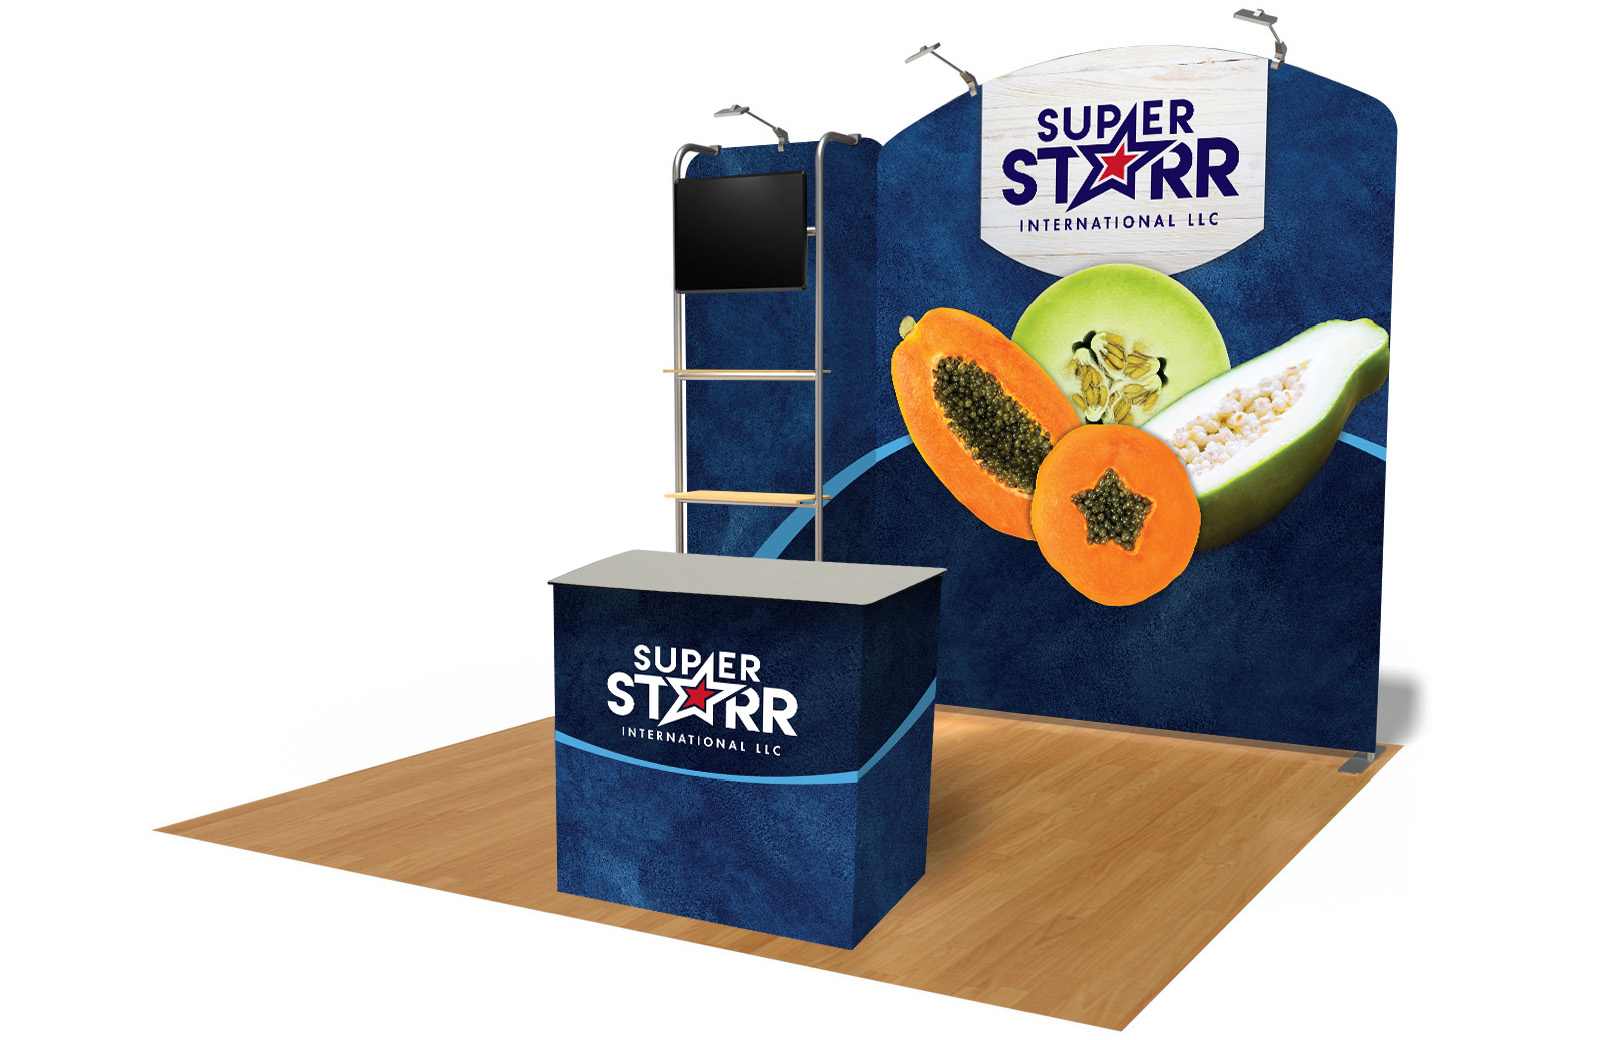 A mock-up of a tradeshow booth and counter with images of Royal Star and Super Starr papayas on dark blue watercolor backgrounds